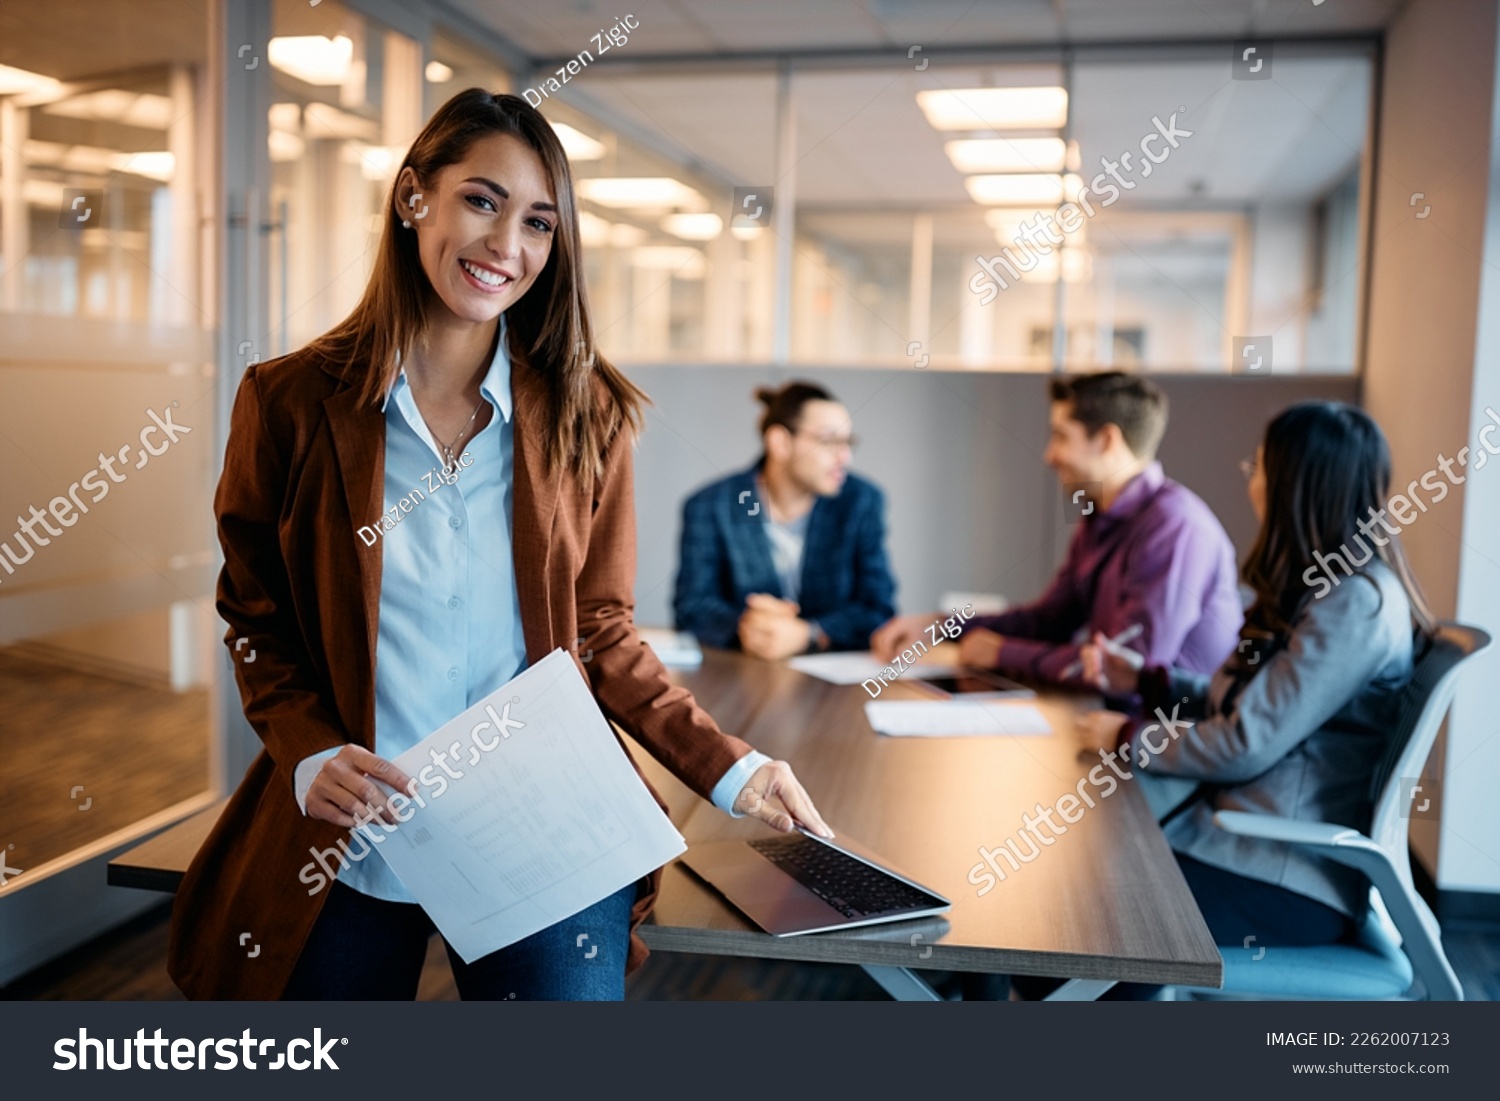 Portrait of young happy businesswoman during a meeting in the office looking at camera. Her colleagues are in the background.  #2262007123